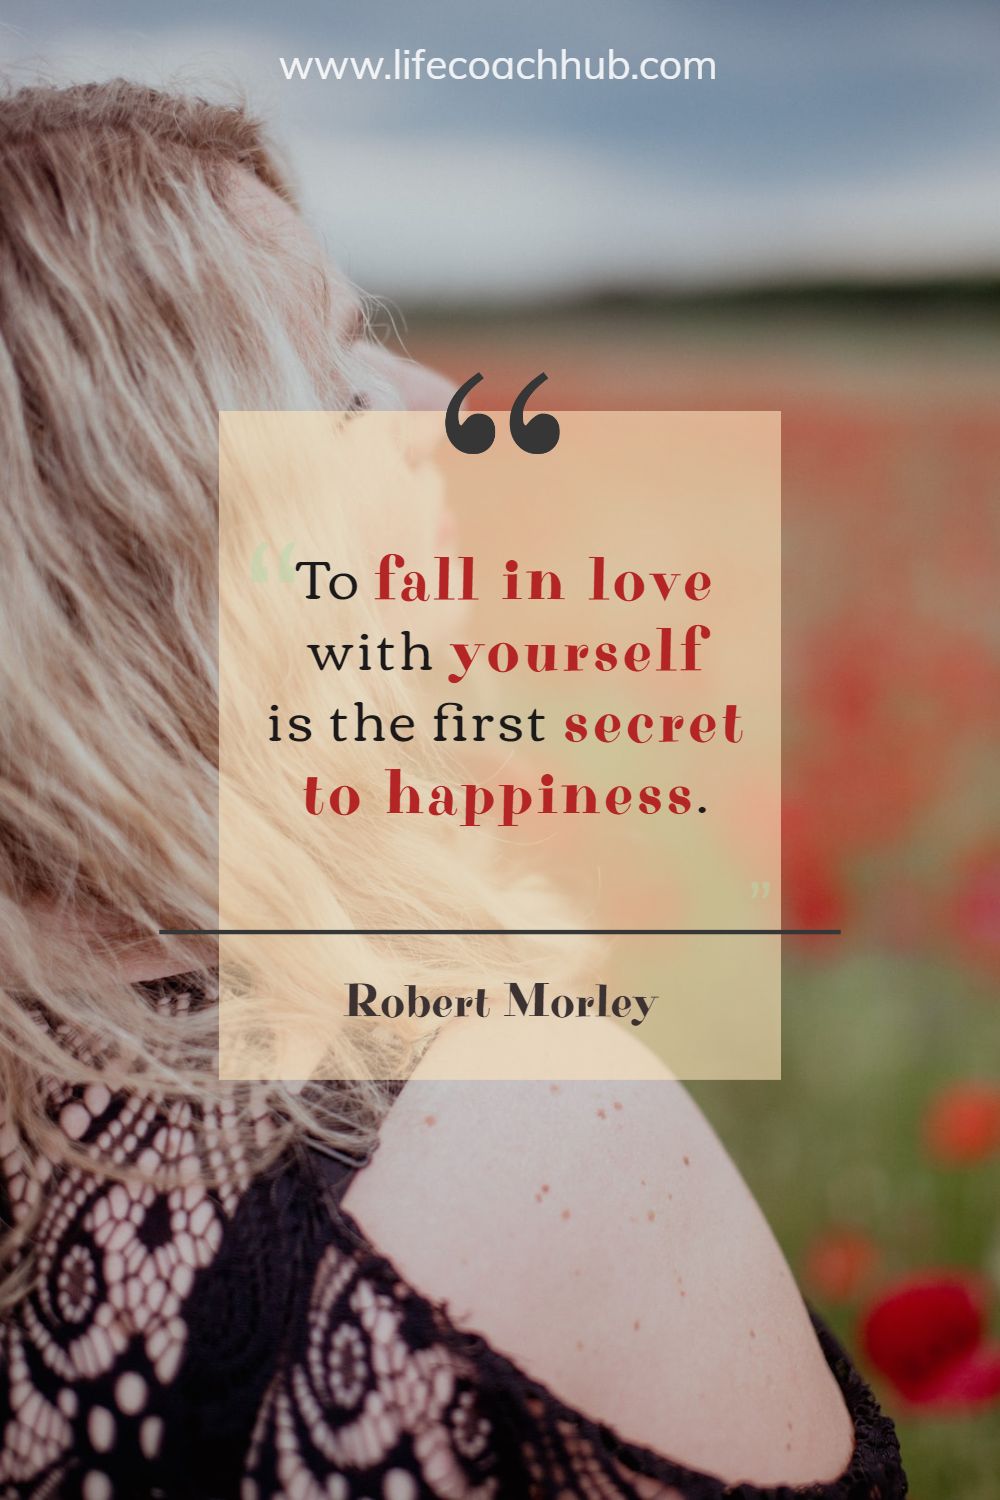 To fall in love with yourself is the first secret to happiness. Robert Morley Coaching Quote